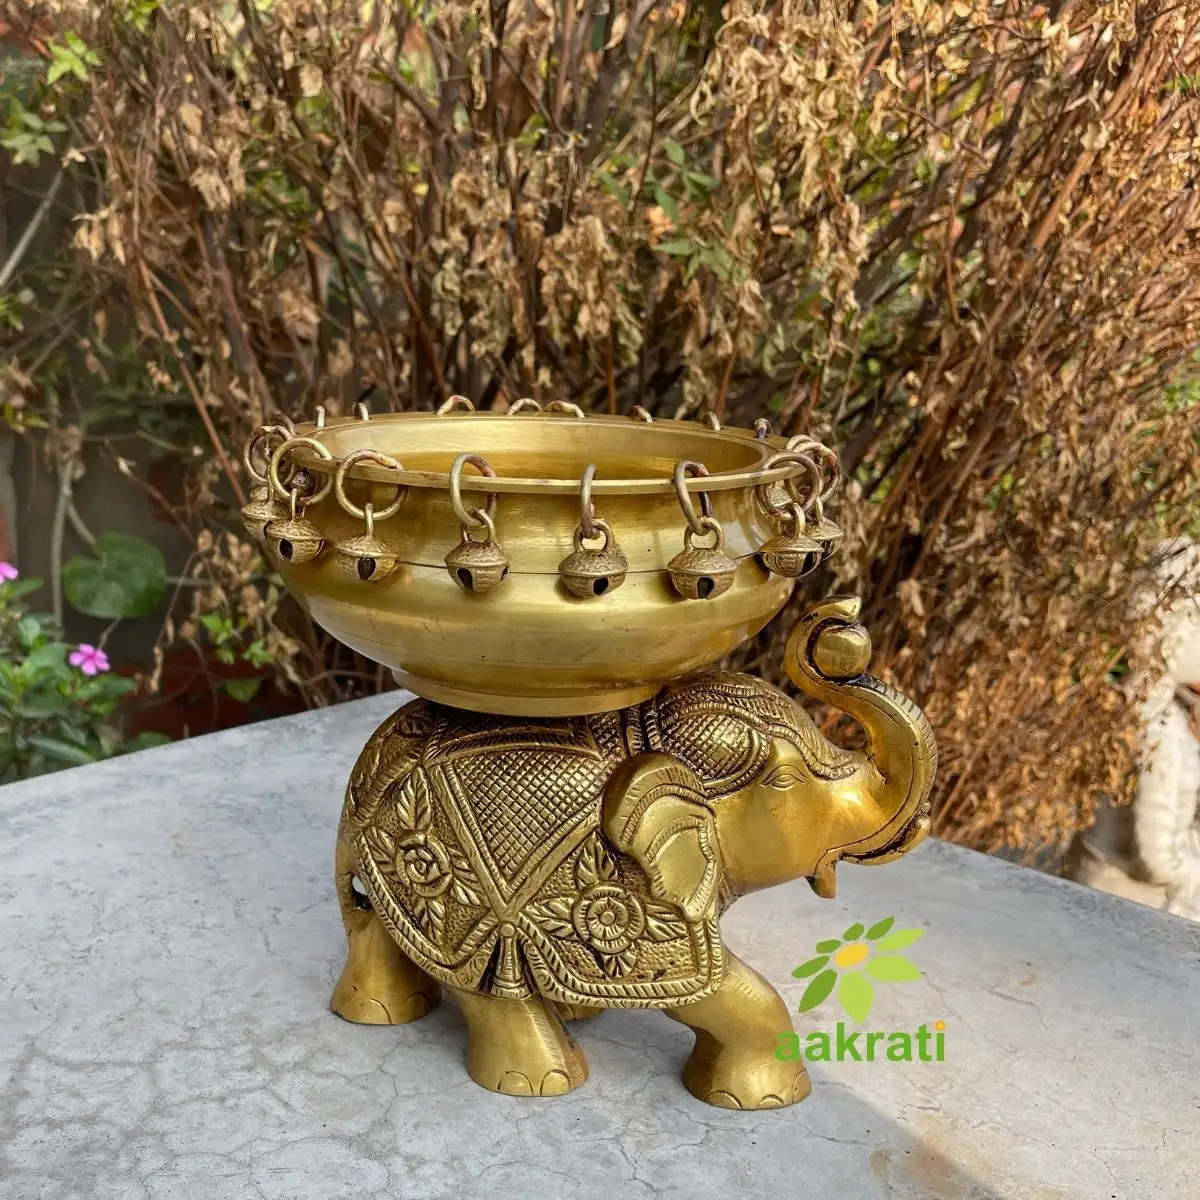 Statue sculpture of Brass Antique Finished Elephant Figurine with Hurli Great Addition to Temple Home Decor vases